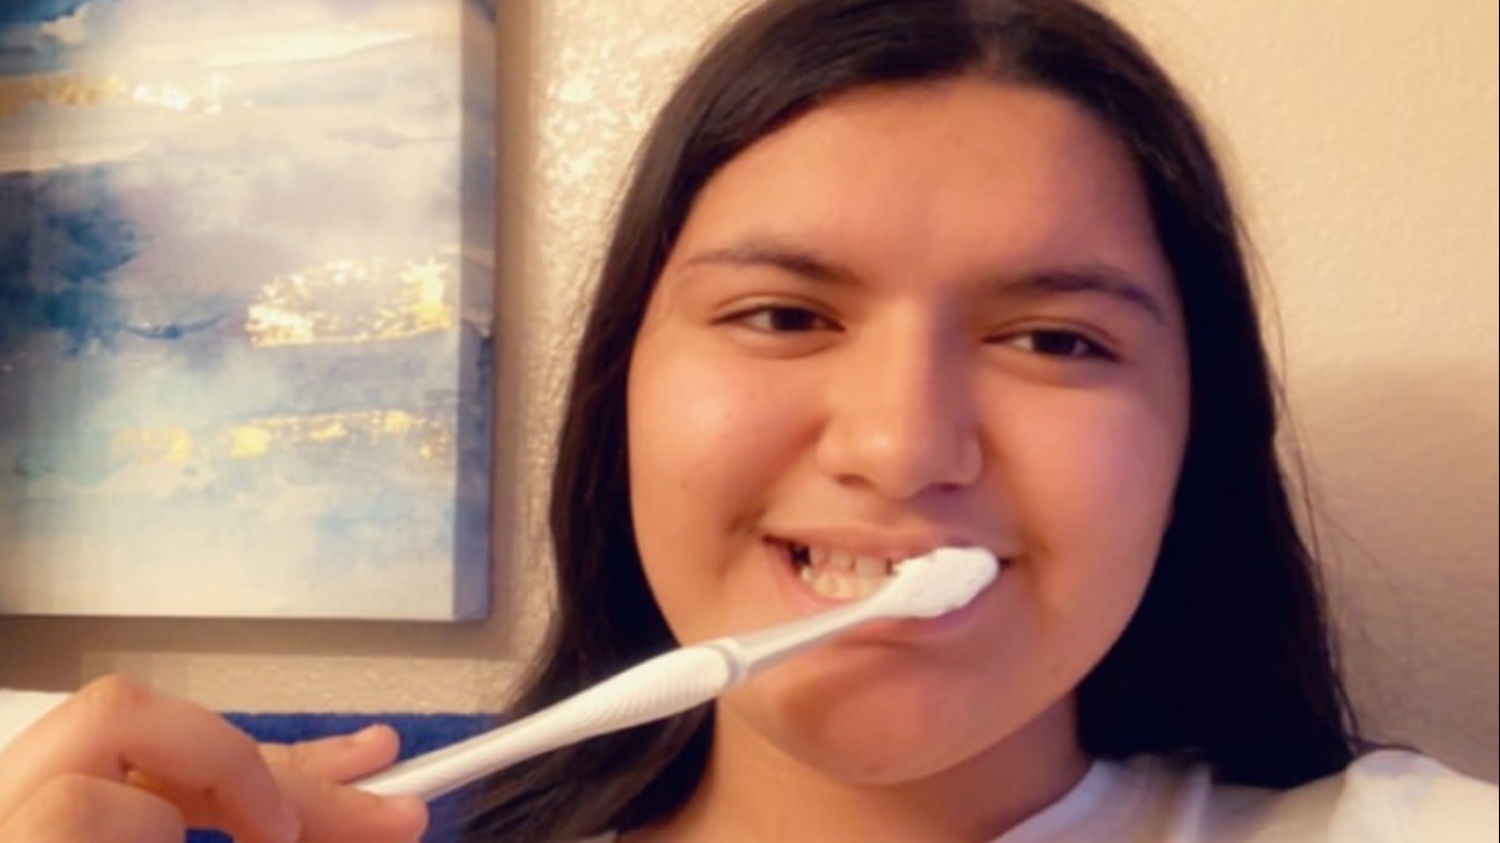 Students enrolled in the Dental Assisting program are utilizing their learned skills at home by brushing their own teeth. This not only helps them practice, but also ensures that they are hygienic. “The Dental Assisting program has helped me learn more about dentistry and gets me closer to my dreams. Even the little things like brushing my teeth gives me practice,” Wendy Ramirez, a sophomore, said. Photo Credit: Wendy Ramirez